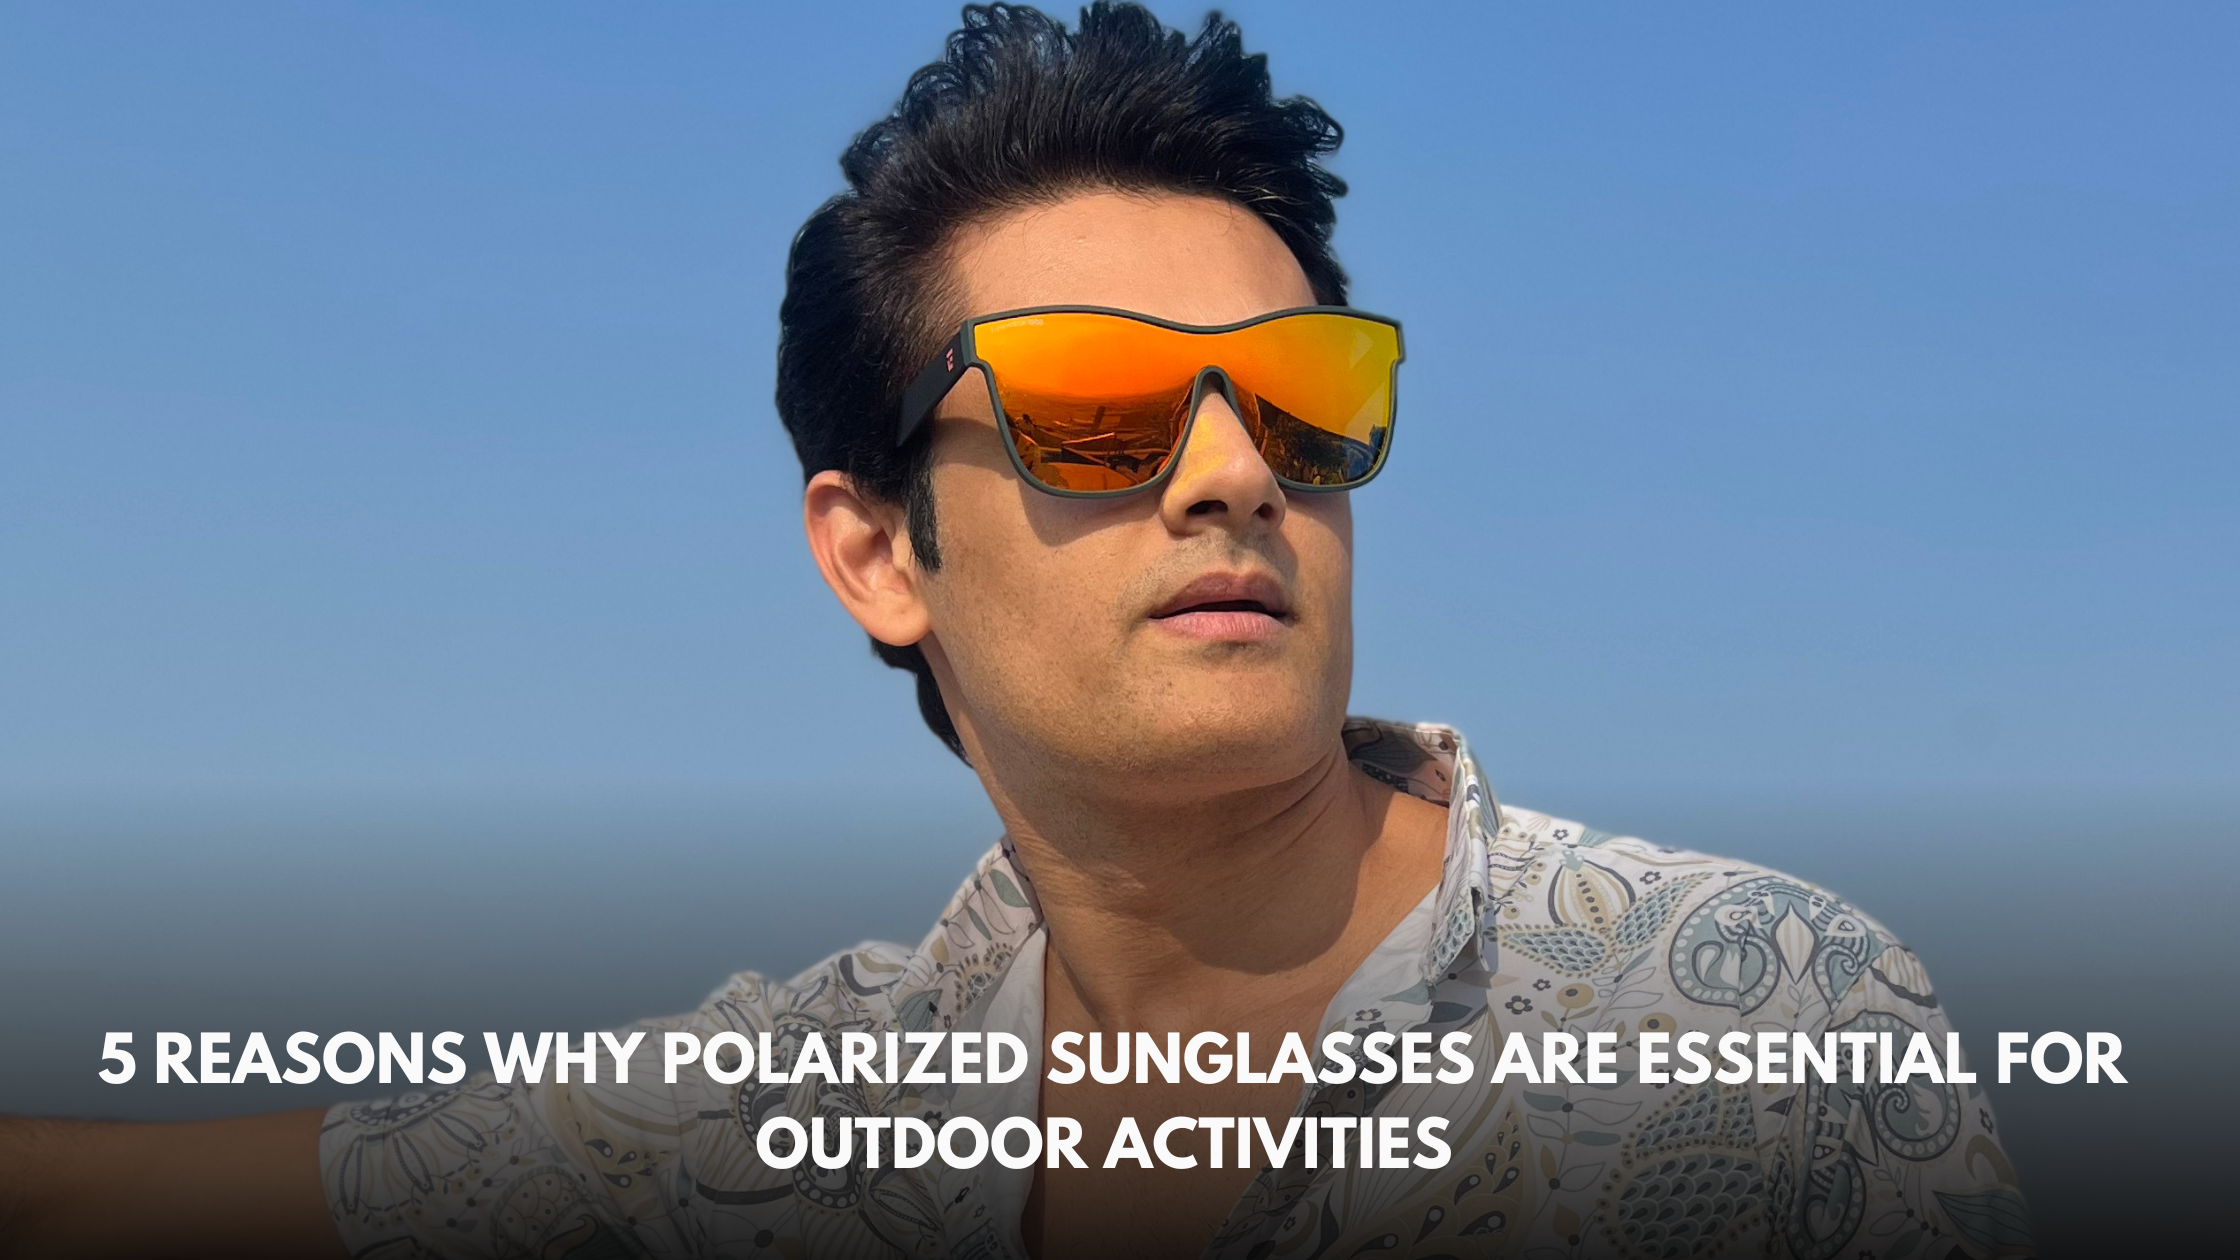 5 Reasons Why Polarized Sunglasses Are Essential for Outdoor Activities